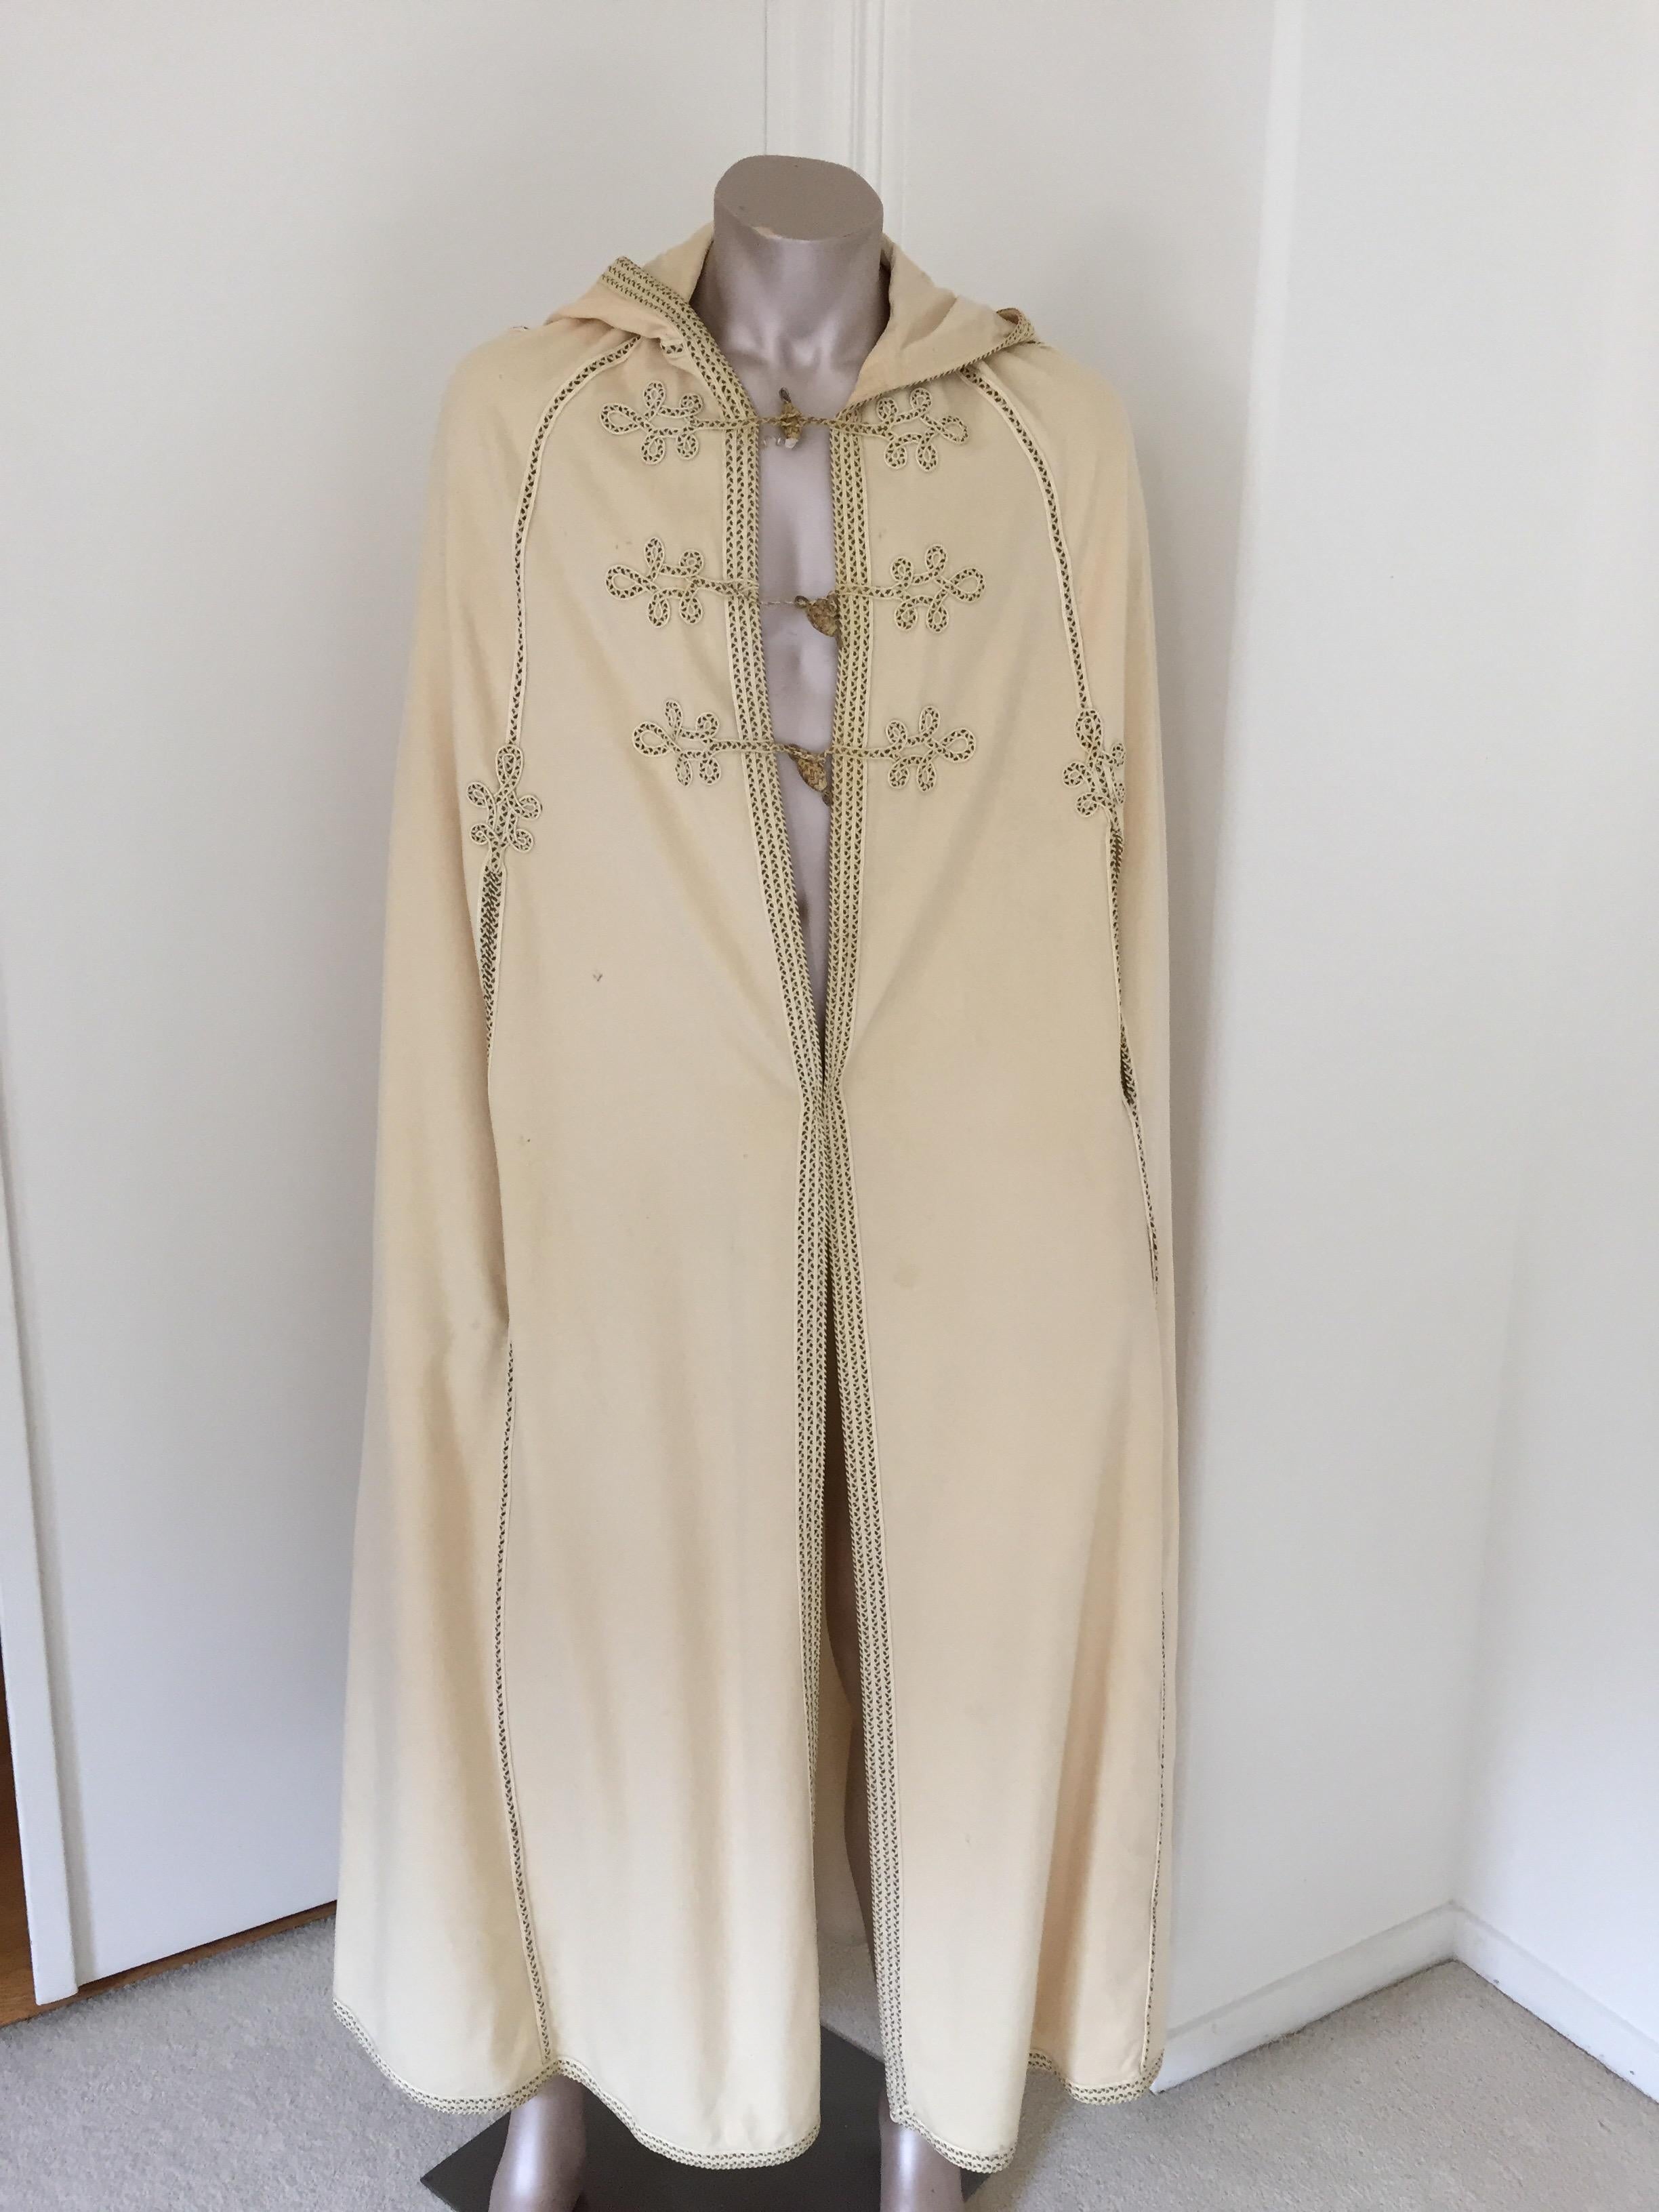 Elegant Moroccan hooded burnous cape in off-white fine wool with black and ivory passementerie trim and closure a long tassel on hood, the caftan is fully Lined.
The burnus (also called a selham) is long, hooded cloak worn in North Africa and the